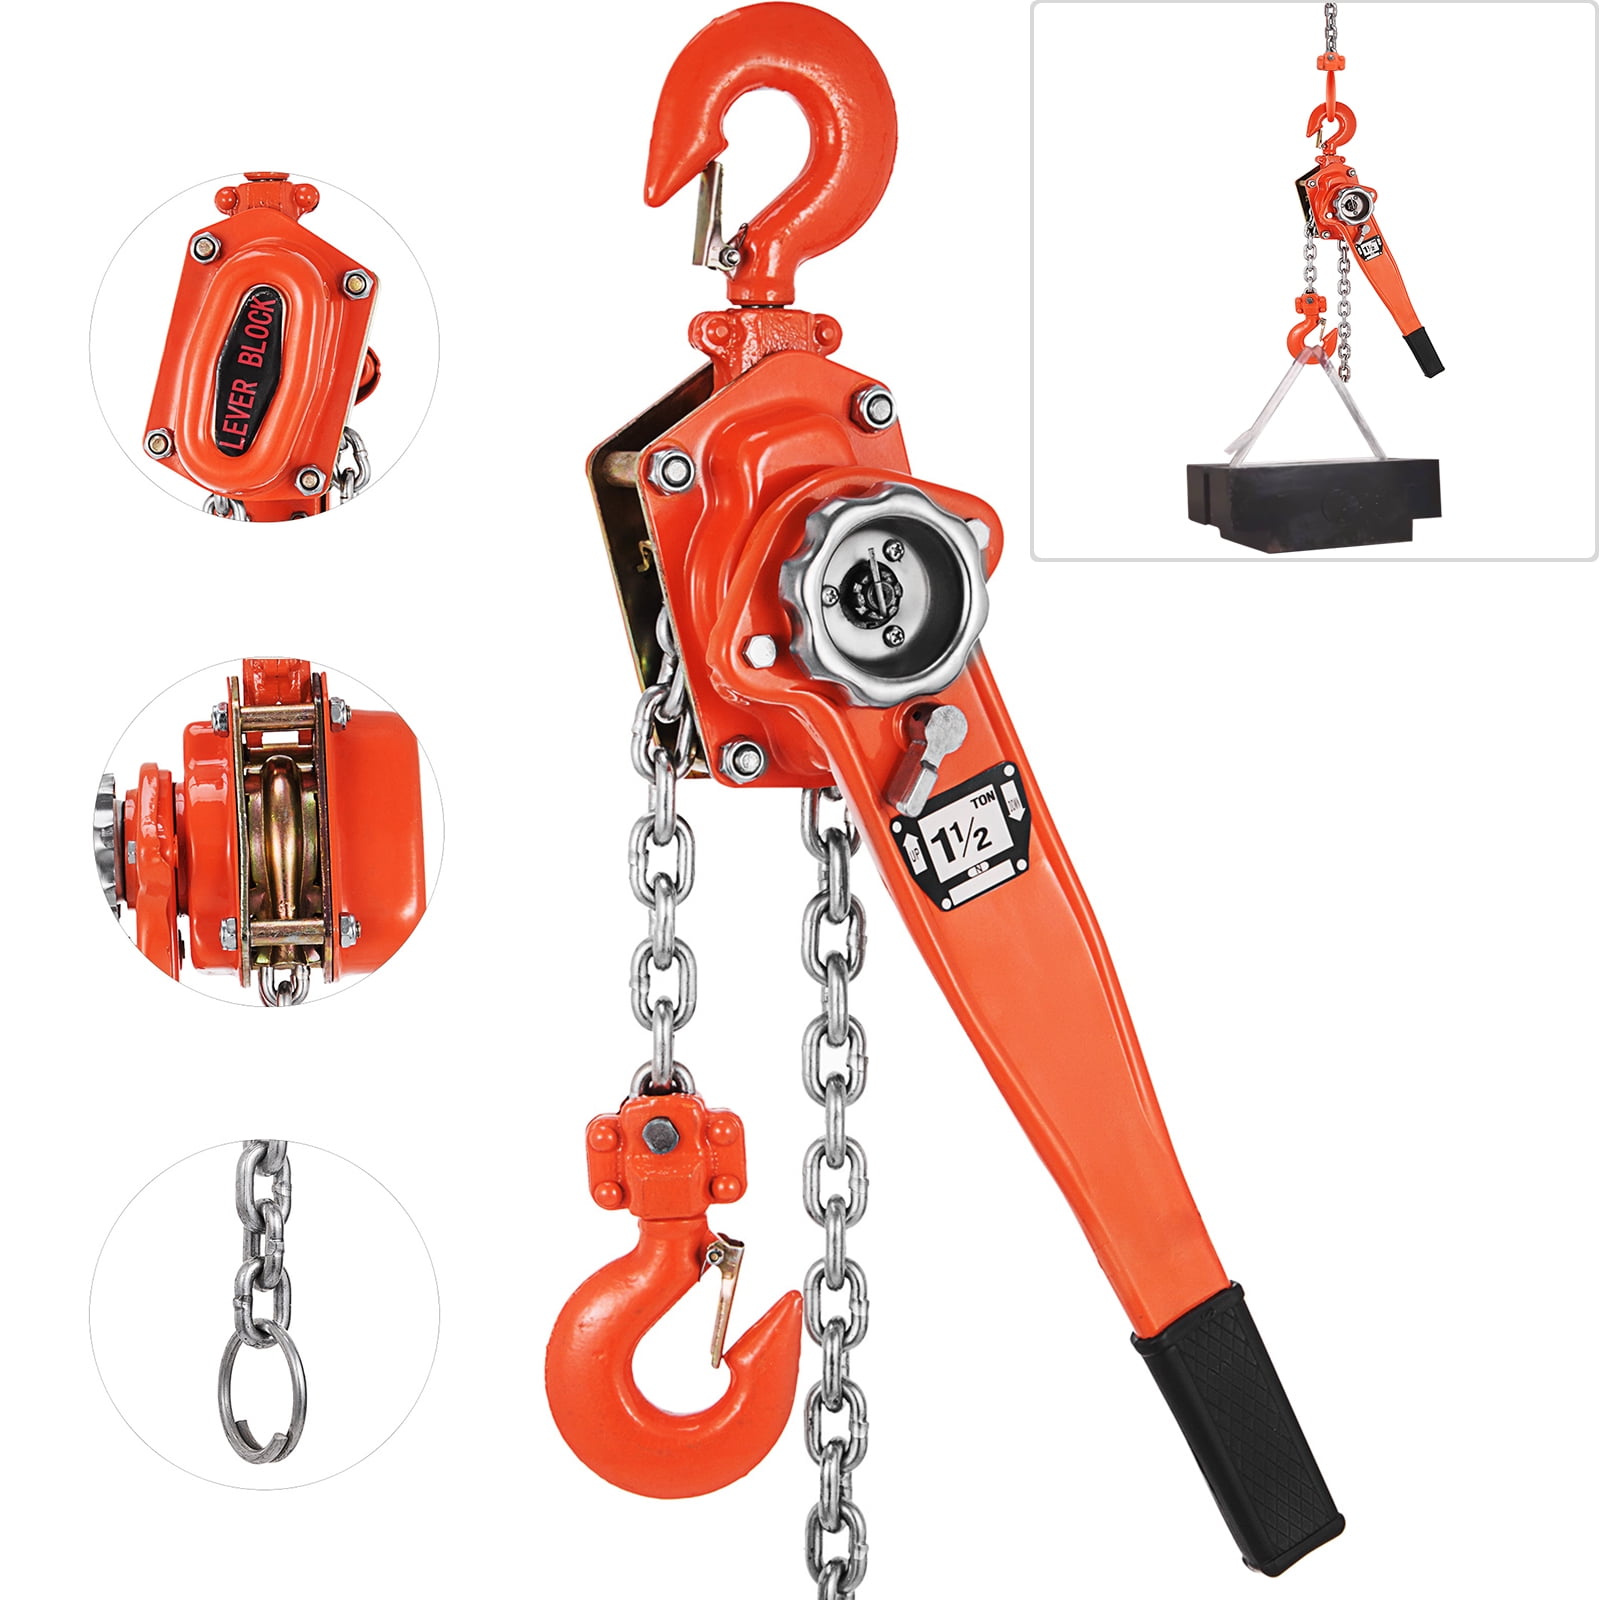 0.75 Ton, 10 Foot Chain TOHO HSH-616 OP Lever Block/Ratchet Puller Hoist with Overload Protection